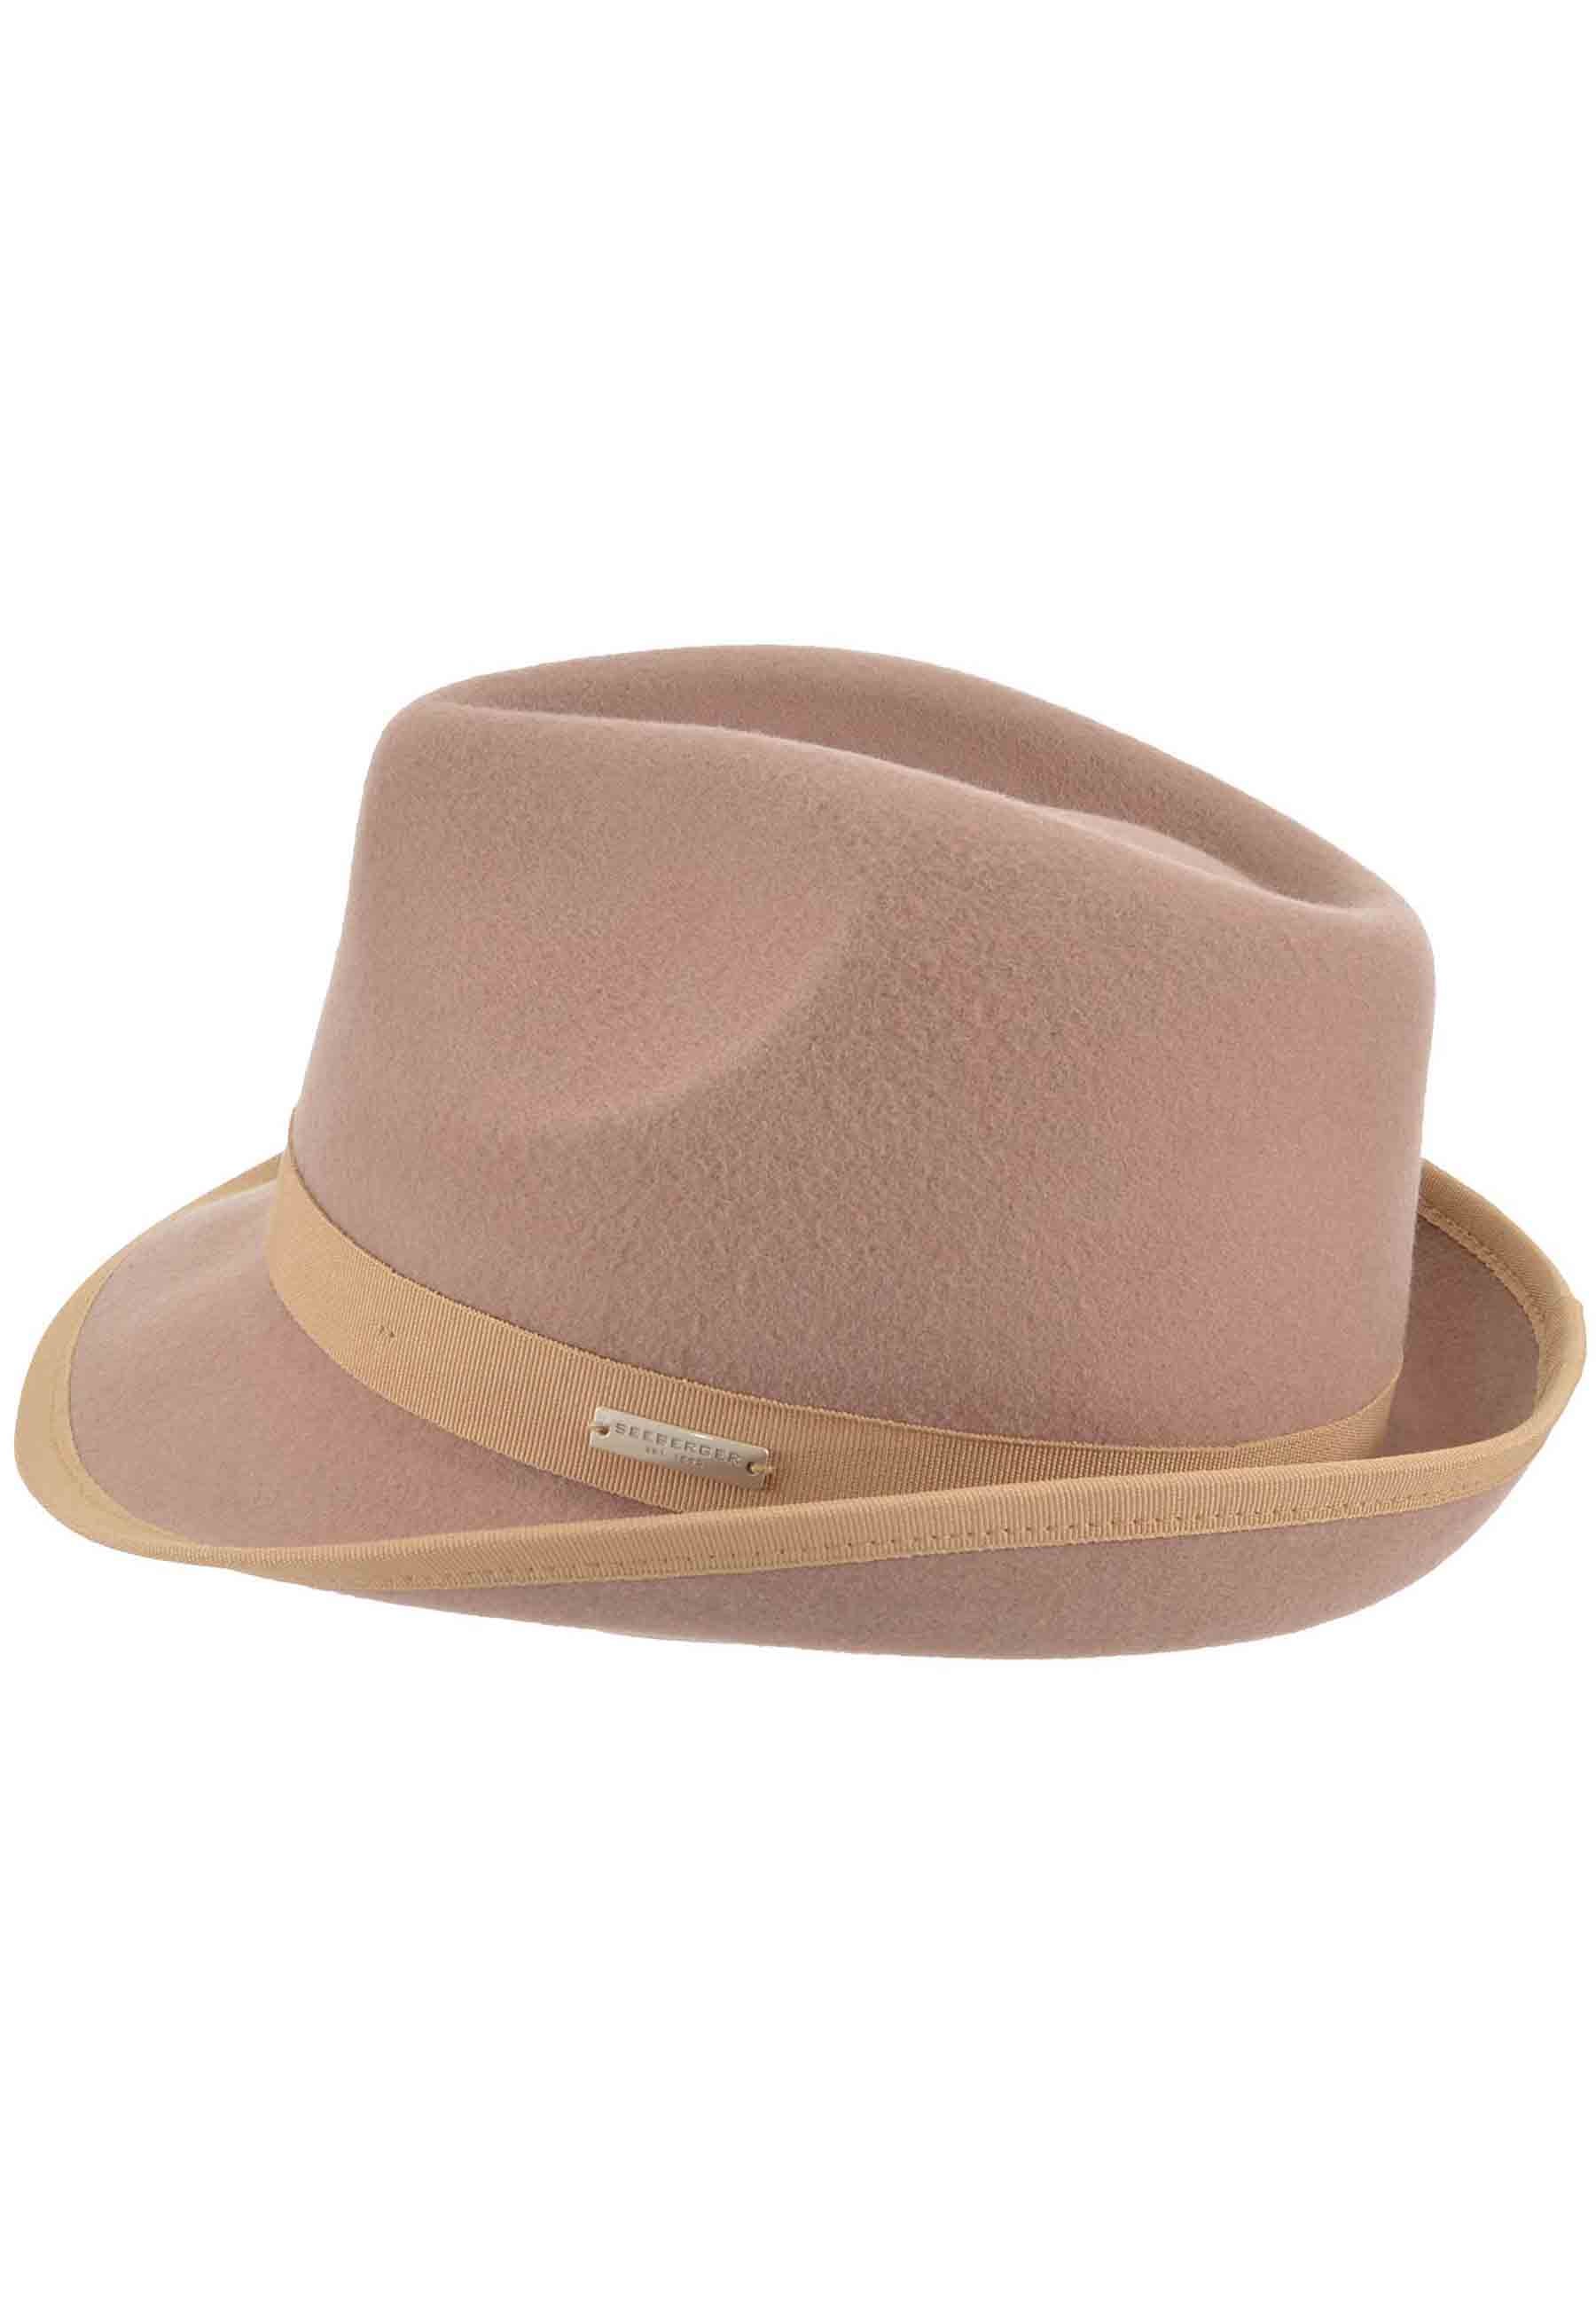 Cappello donna Trilby in lana camel